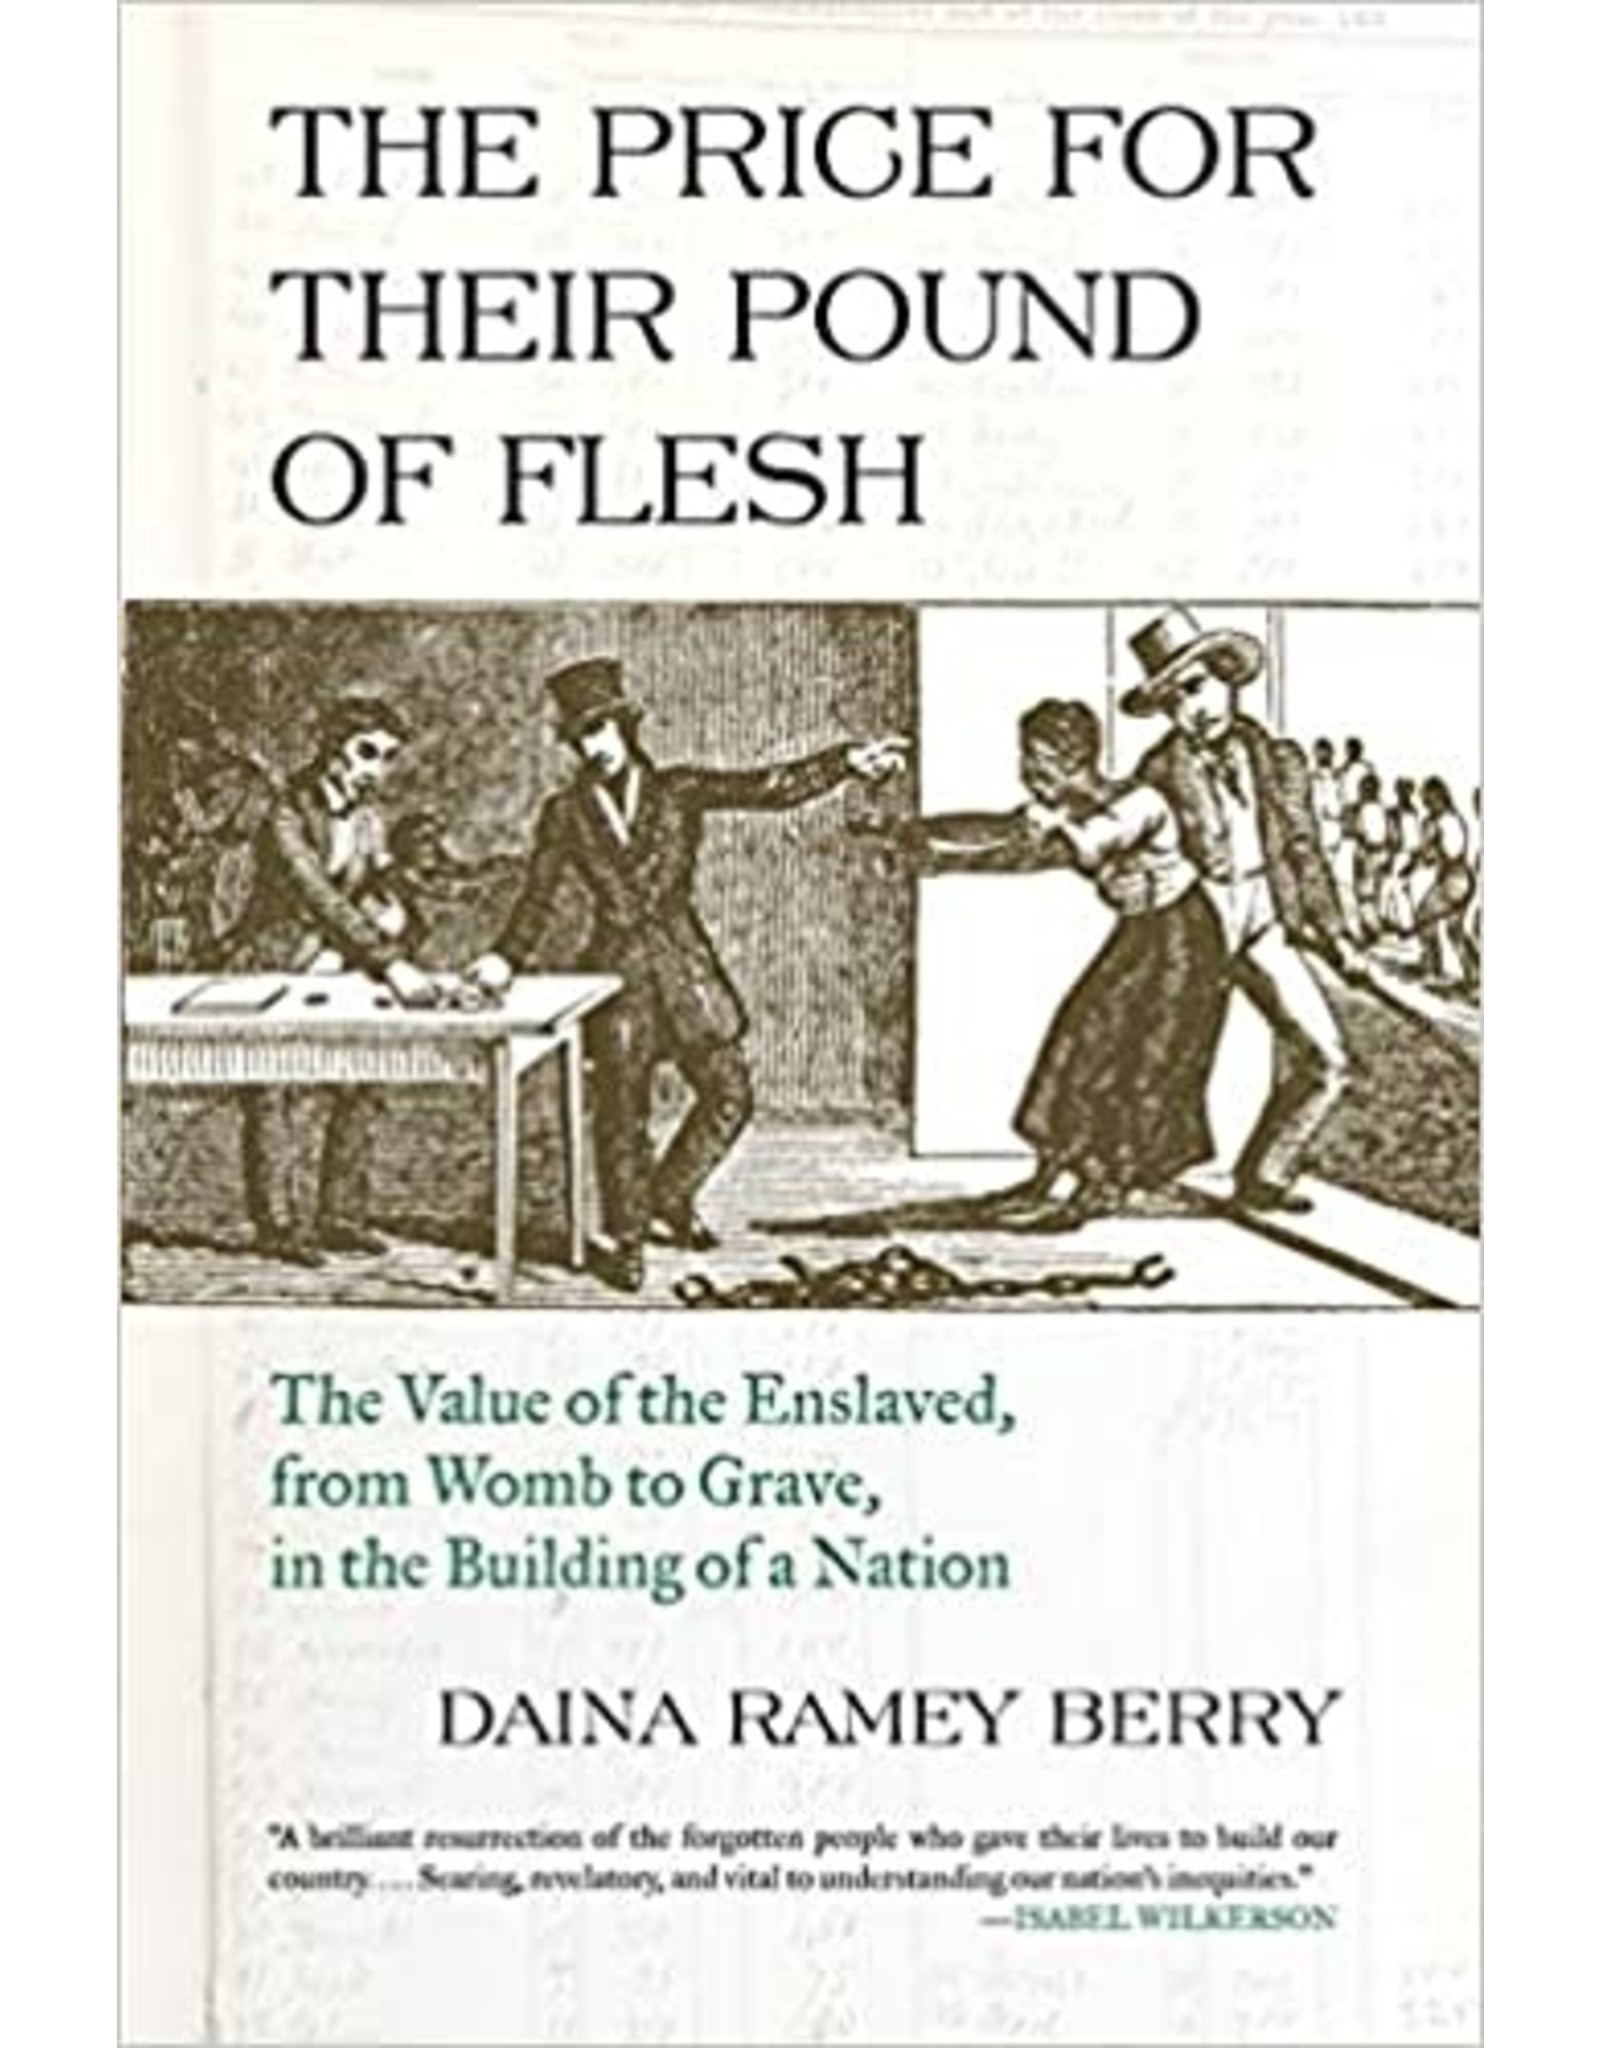 The Price For the Pound of Their Flesh